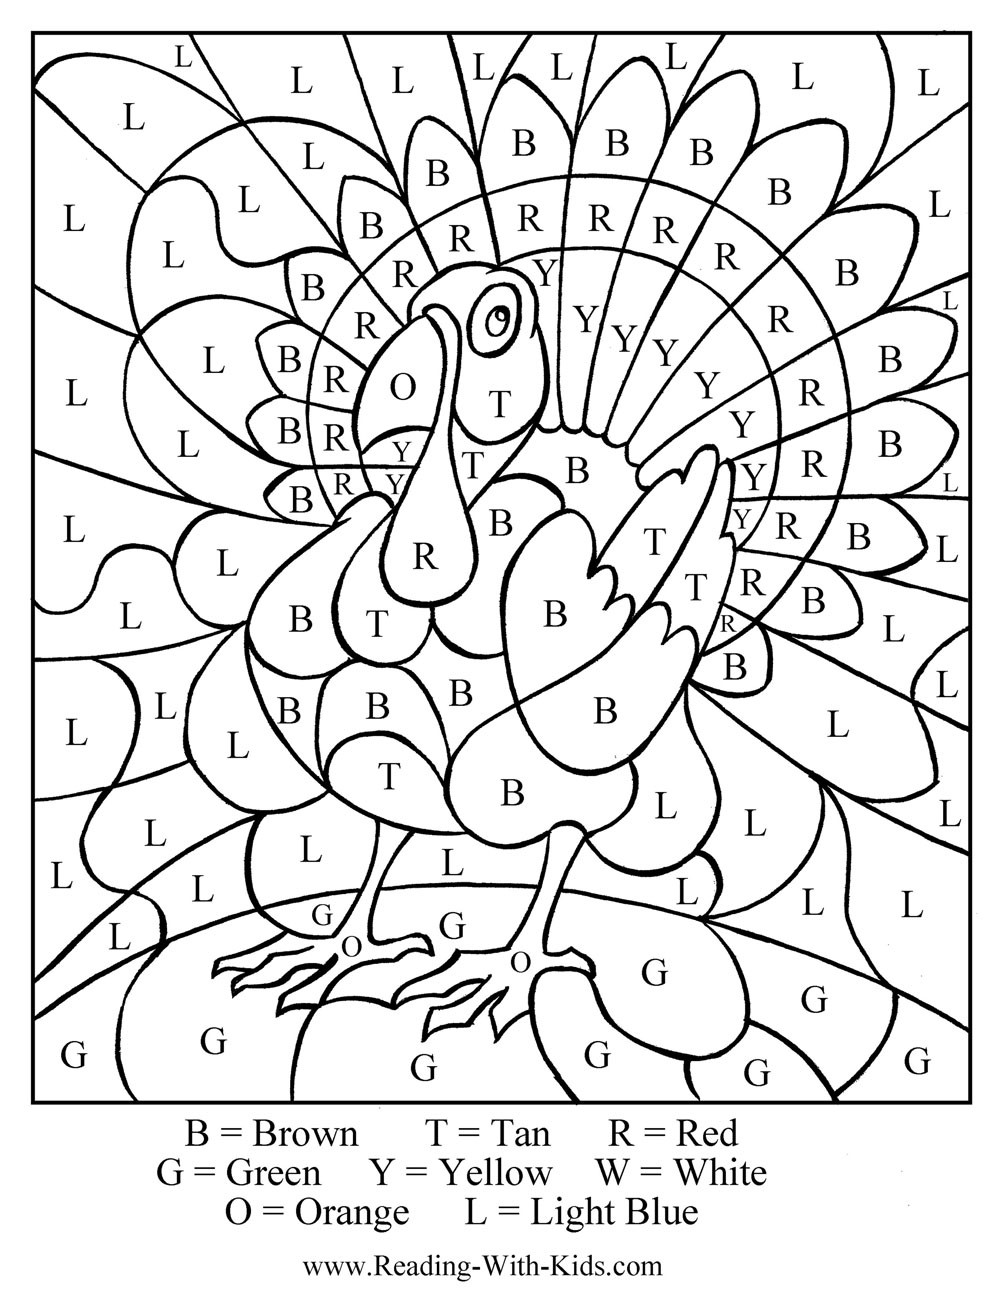 Thanksgiving Coloring Pages For Kids
 Thanksgiving Coloring Pages